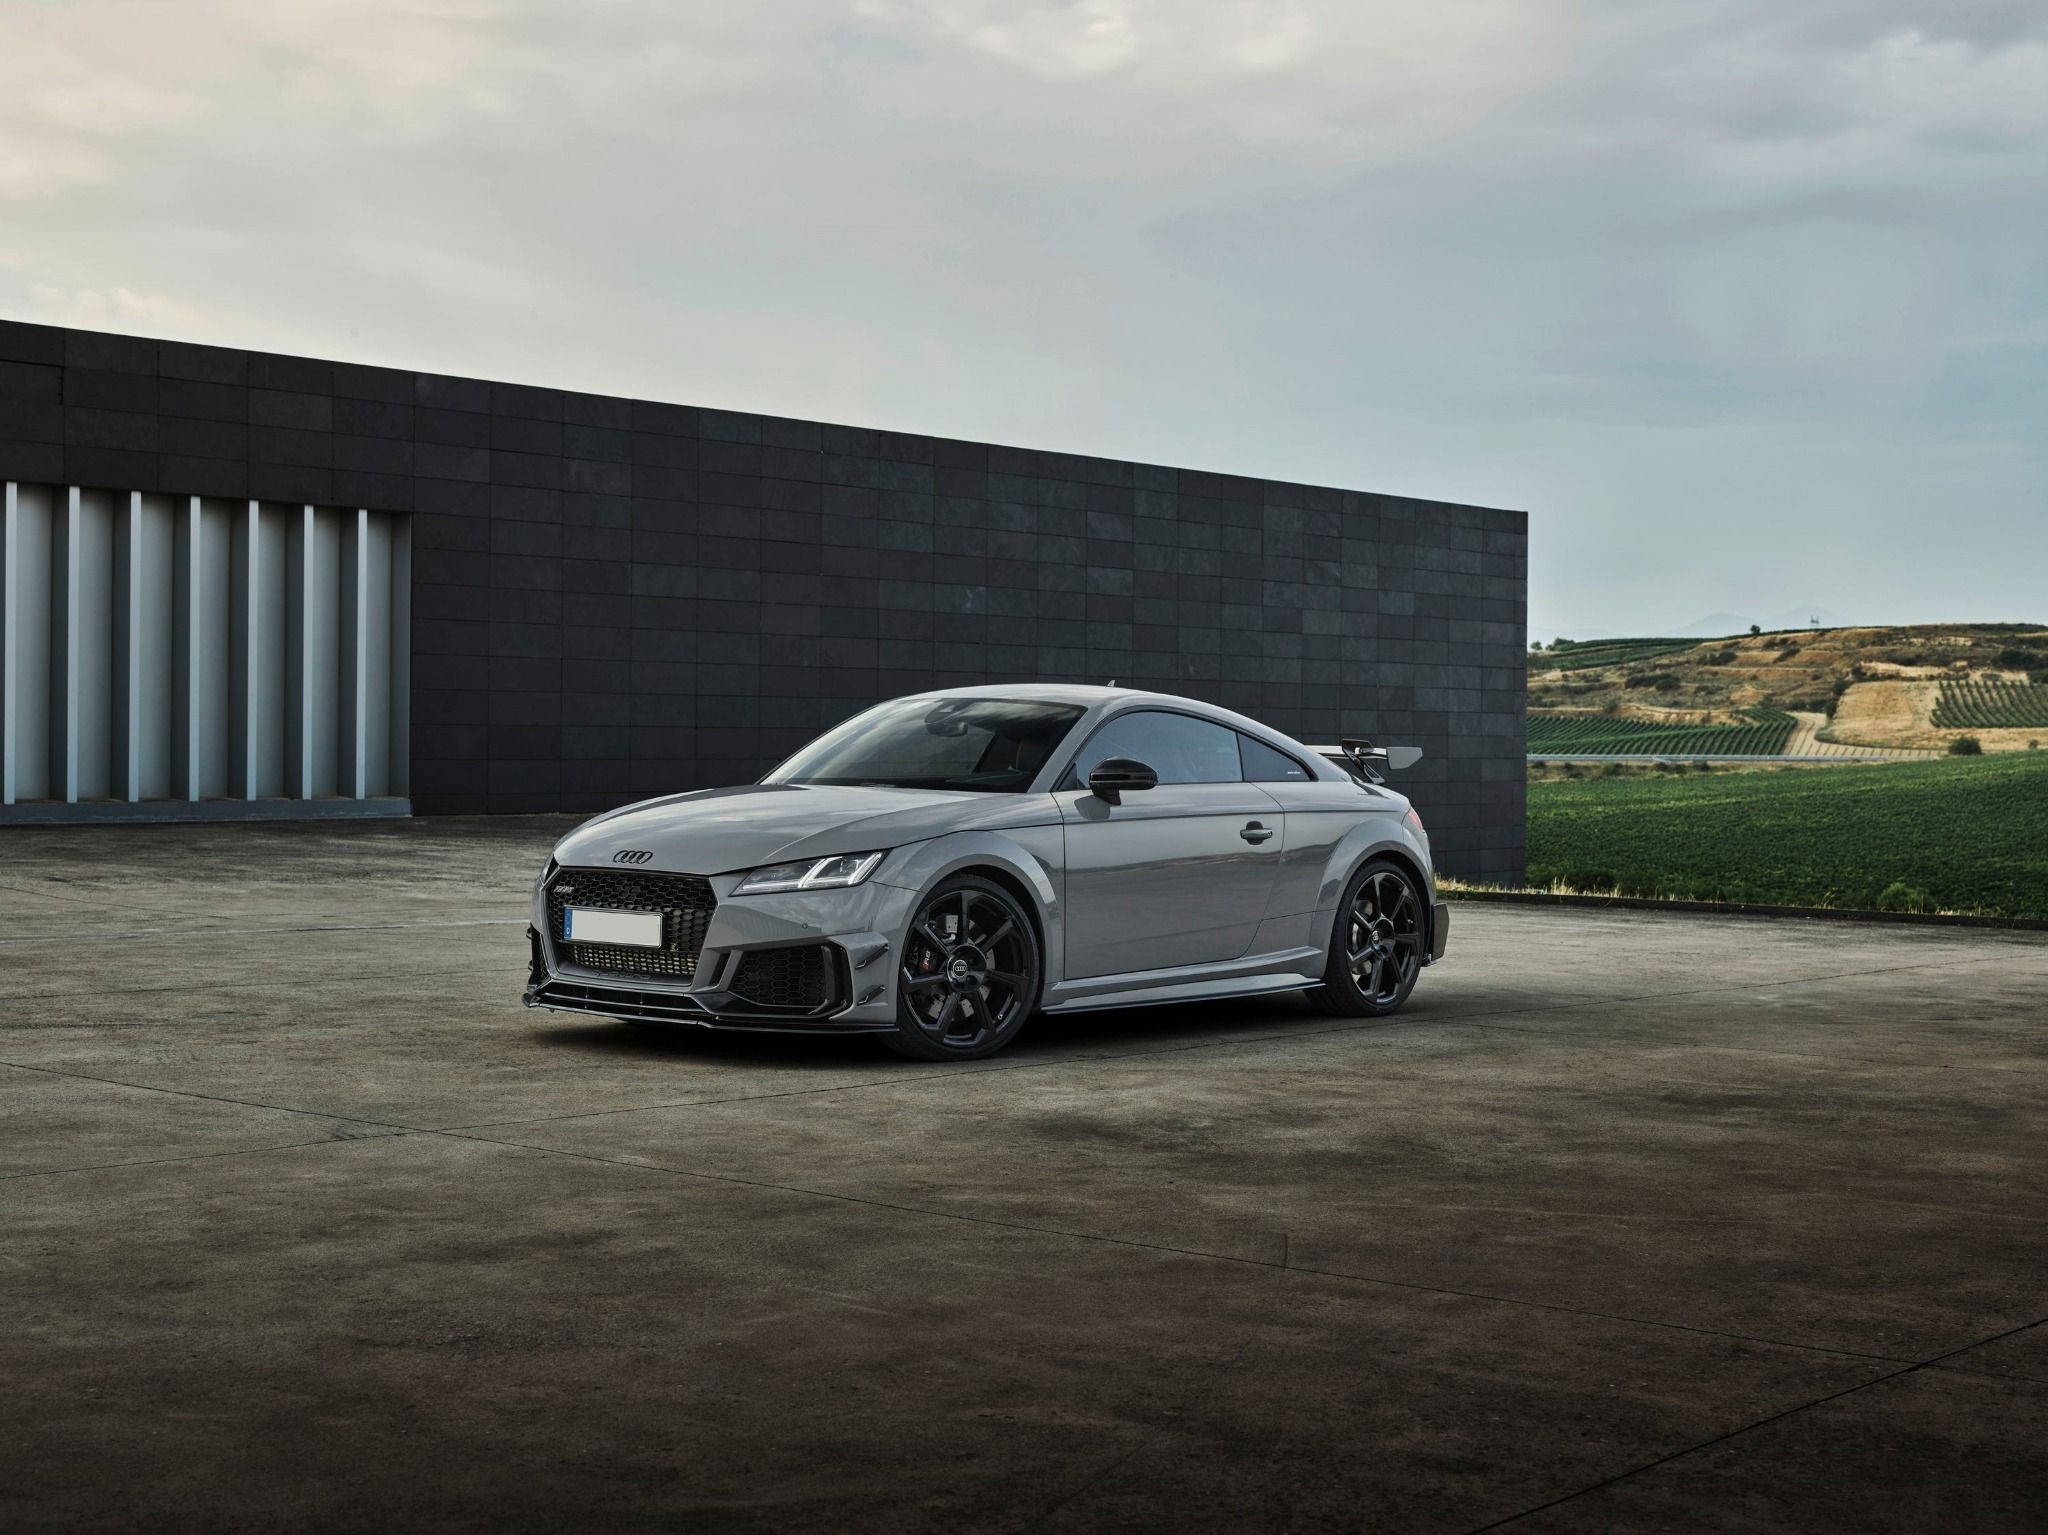 The history of the Audi TT image